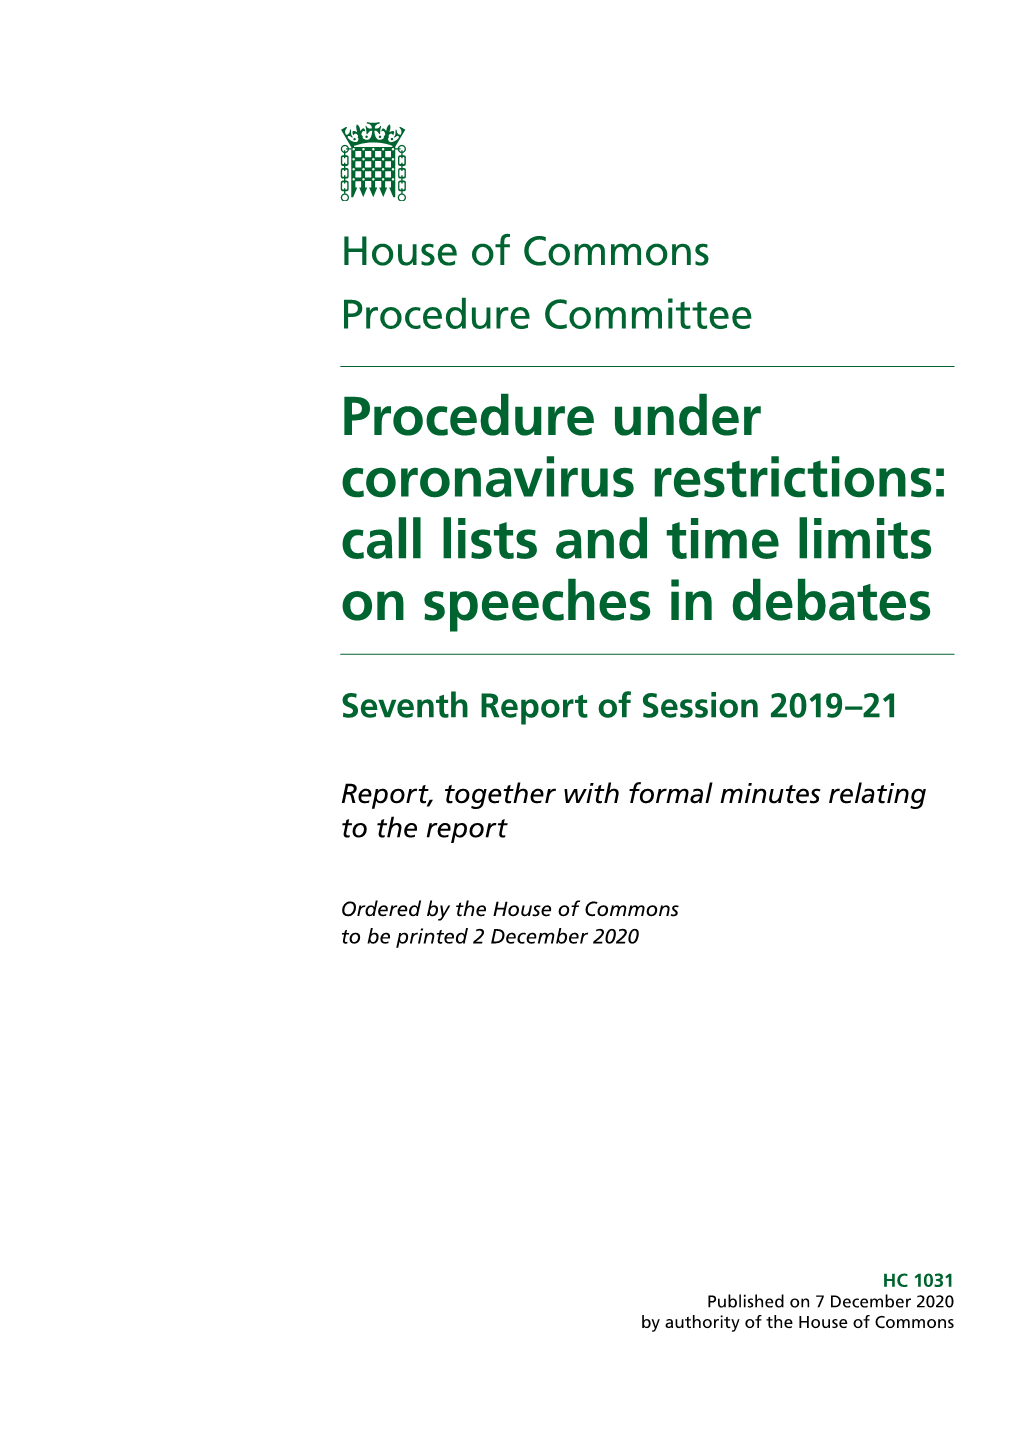 Procedure Under Coronavirus Restrictions: Call Lists and Time Limits on Speeches in Debates